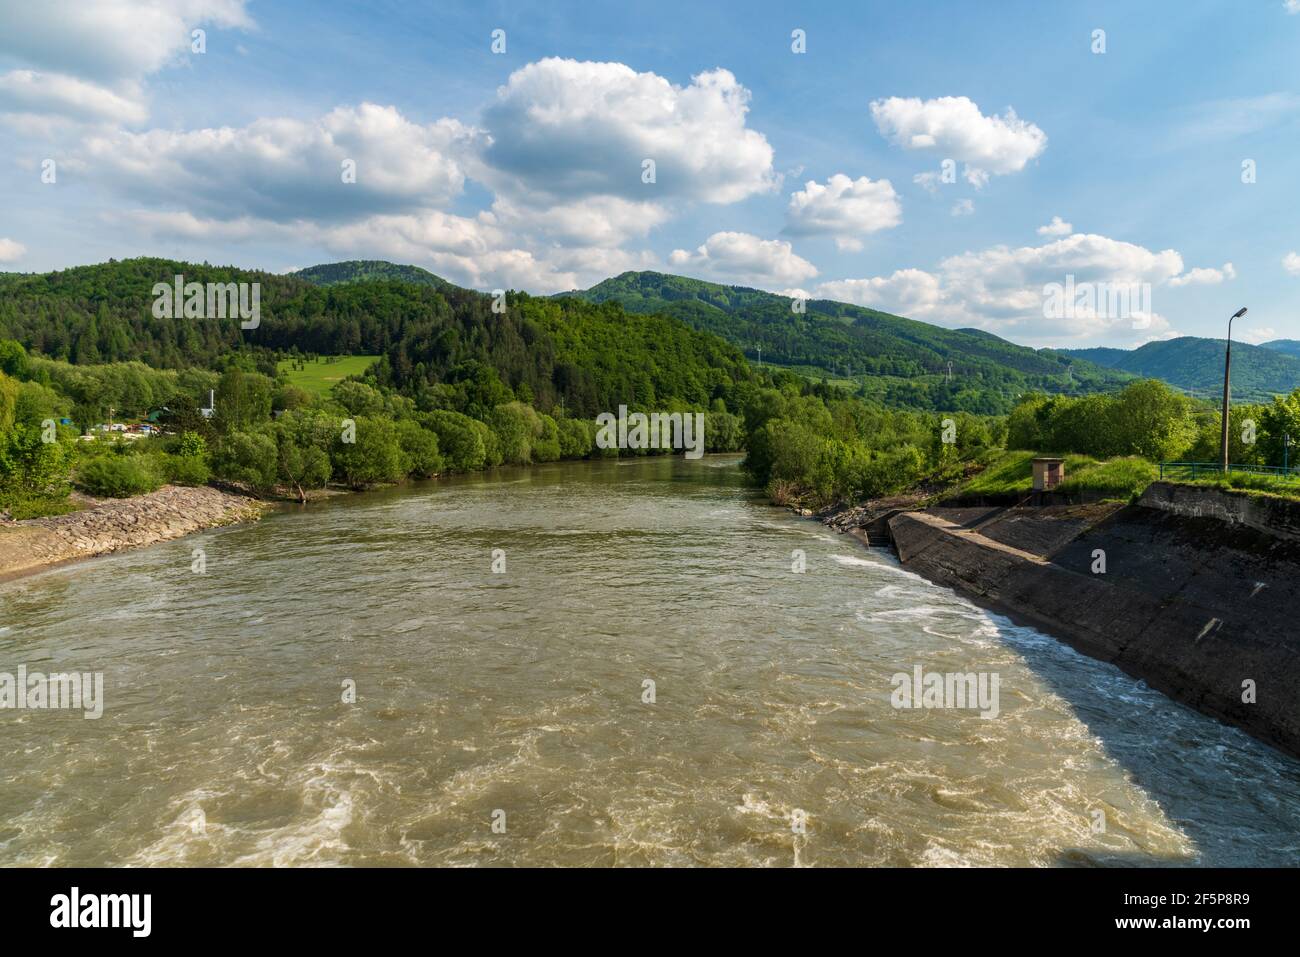 Vah river with hills of Velka Fatra mountains near Krpelany village in Slovakia during beautiful springtime day Stock Photo